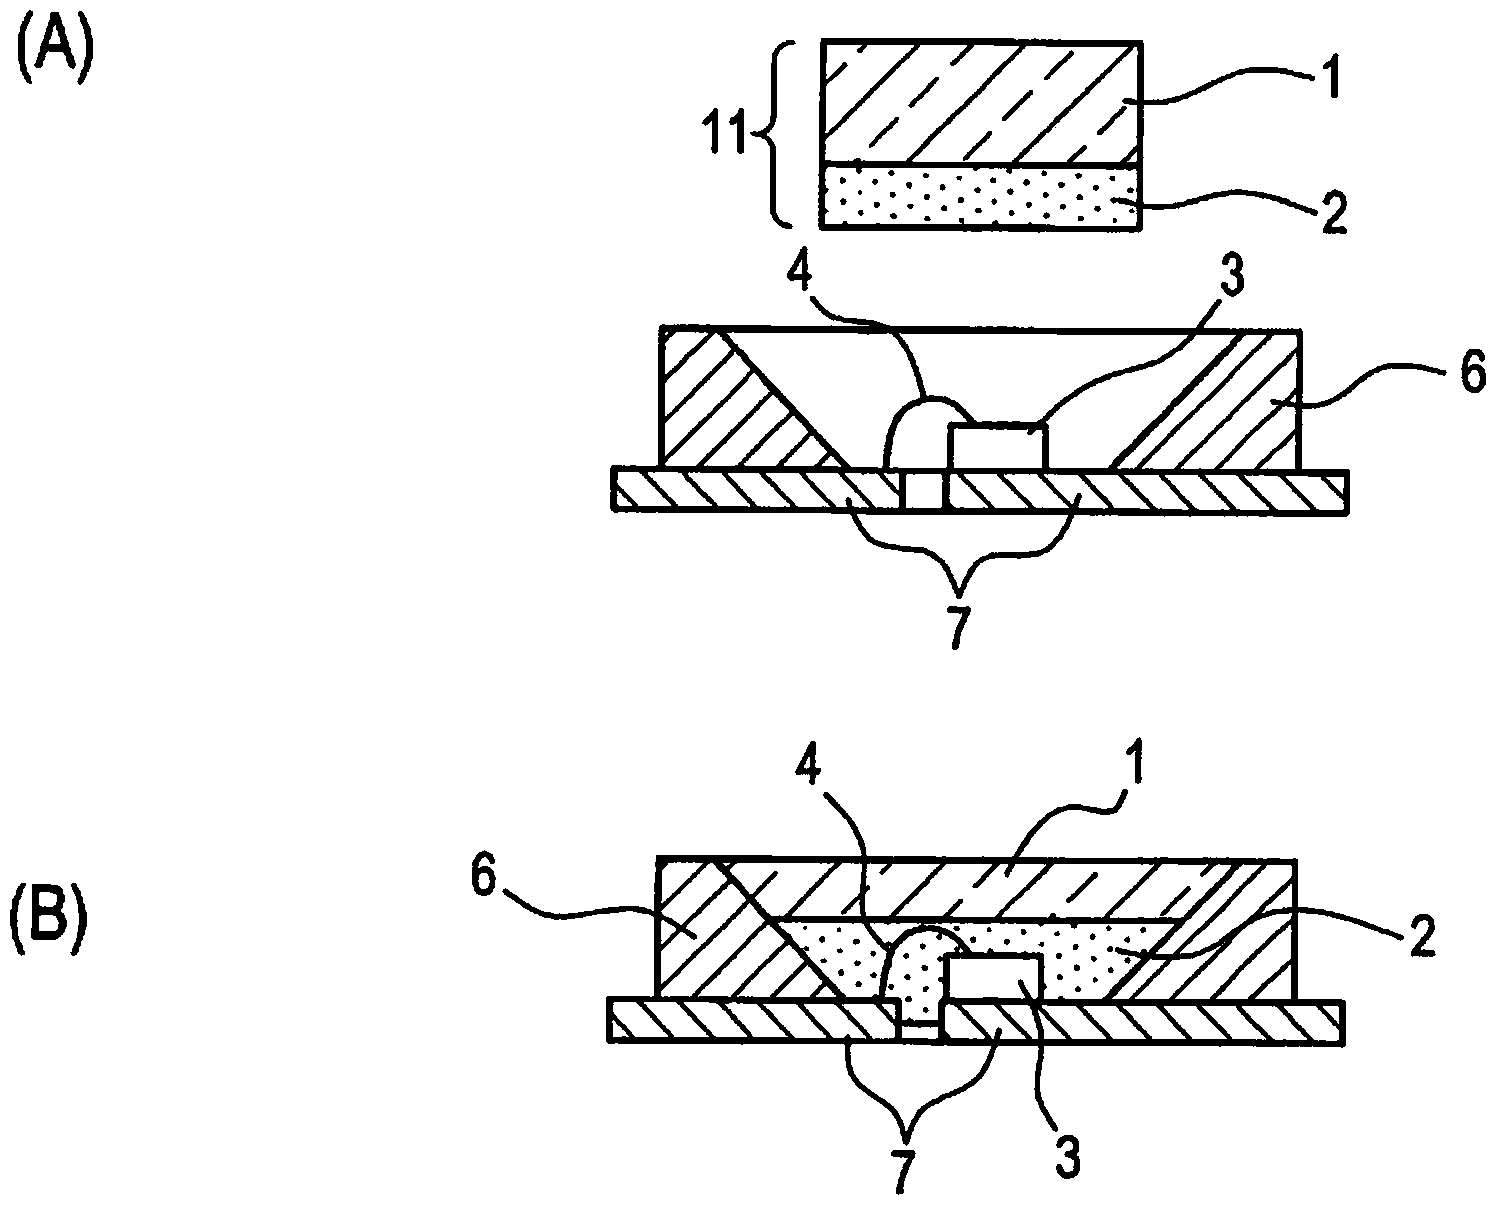 Heat-curable silicone resin sheet having phosphor-containing layer and white pigment-containing layer, method of producing light emitting device using same and encapsulated light emitting semiconductor device produced thereby